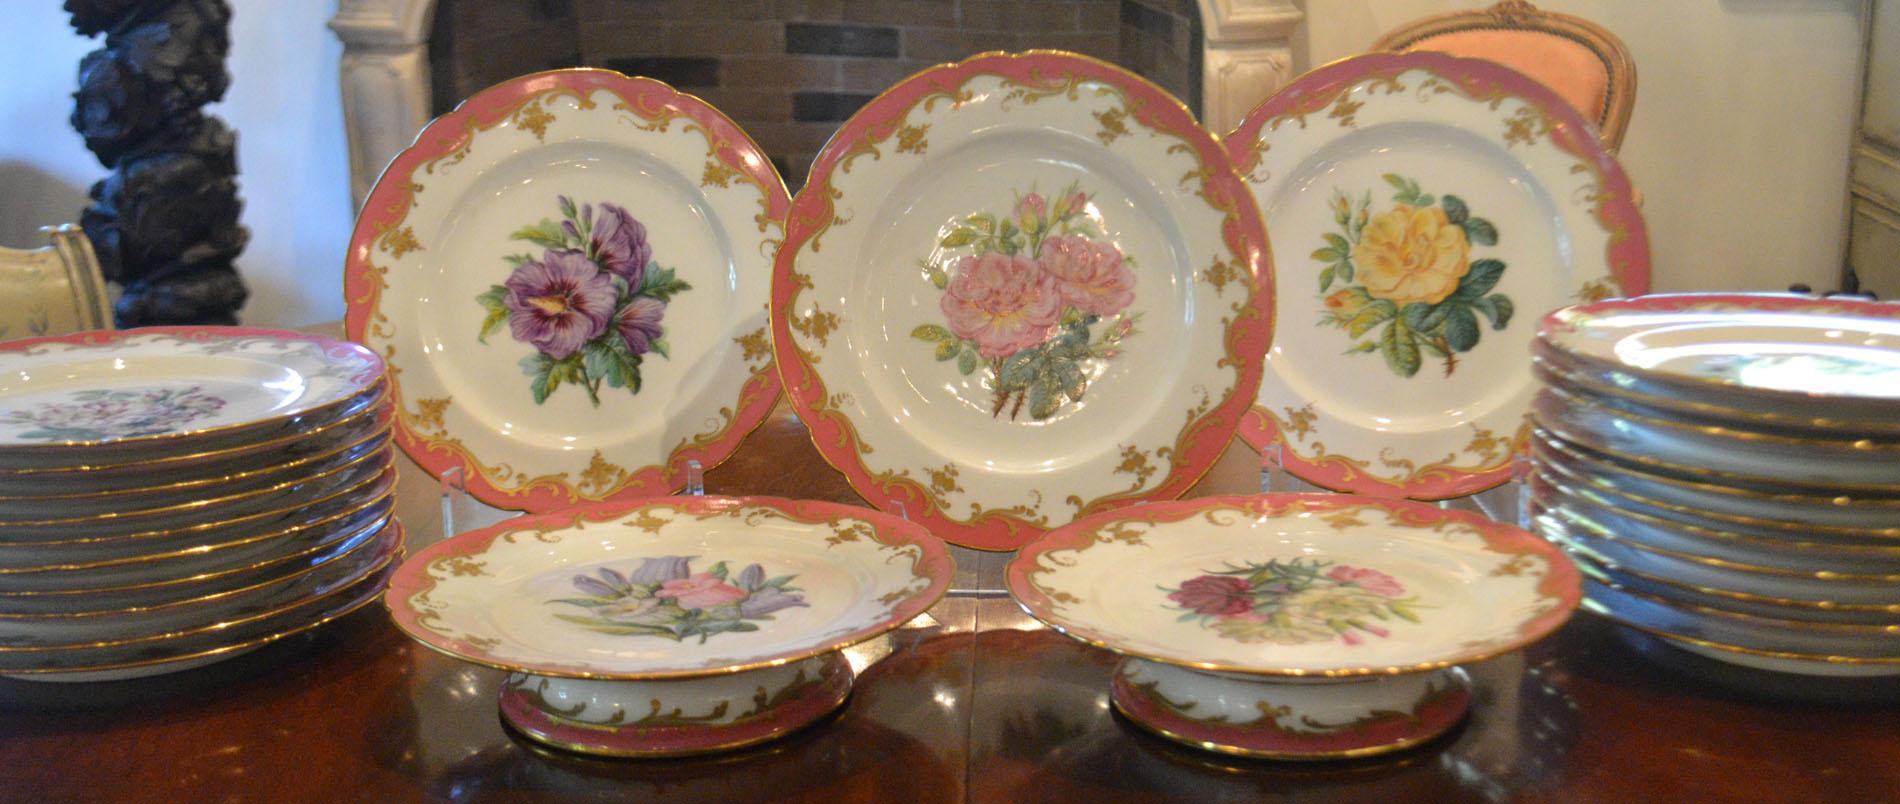 Rare Early 19th Century Paris Botanical Pink Porcelain Service for 24 For Sale 3